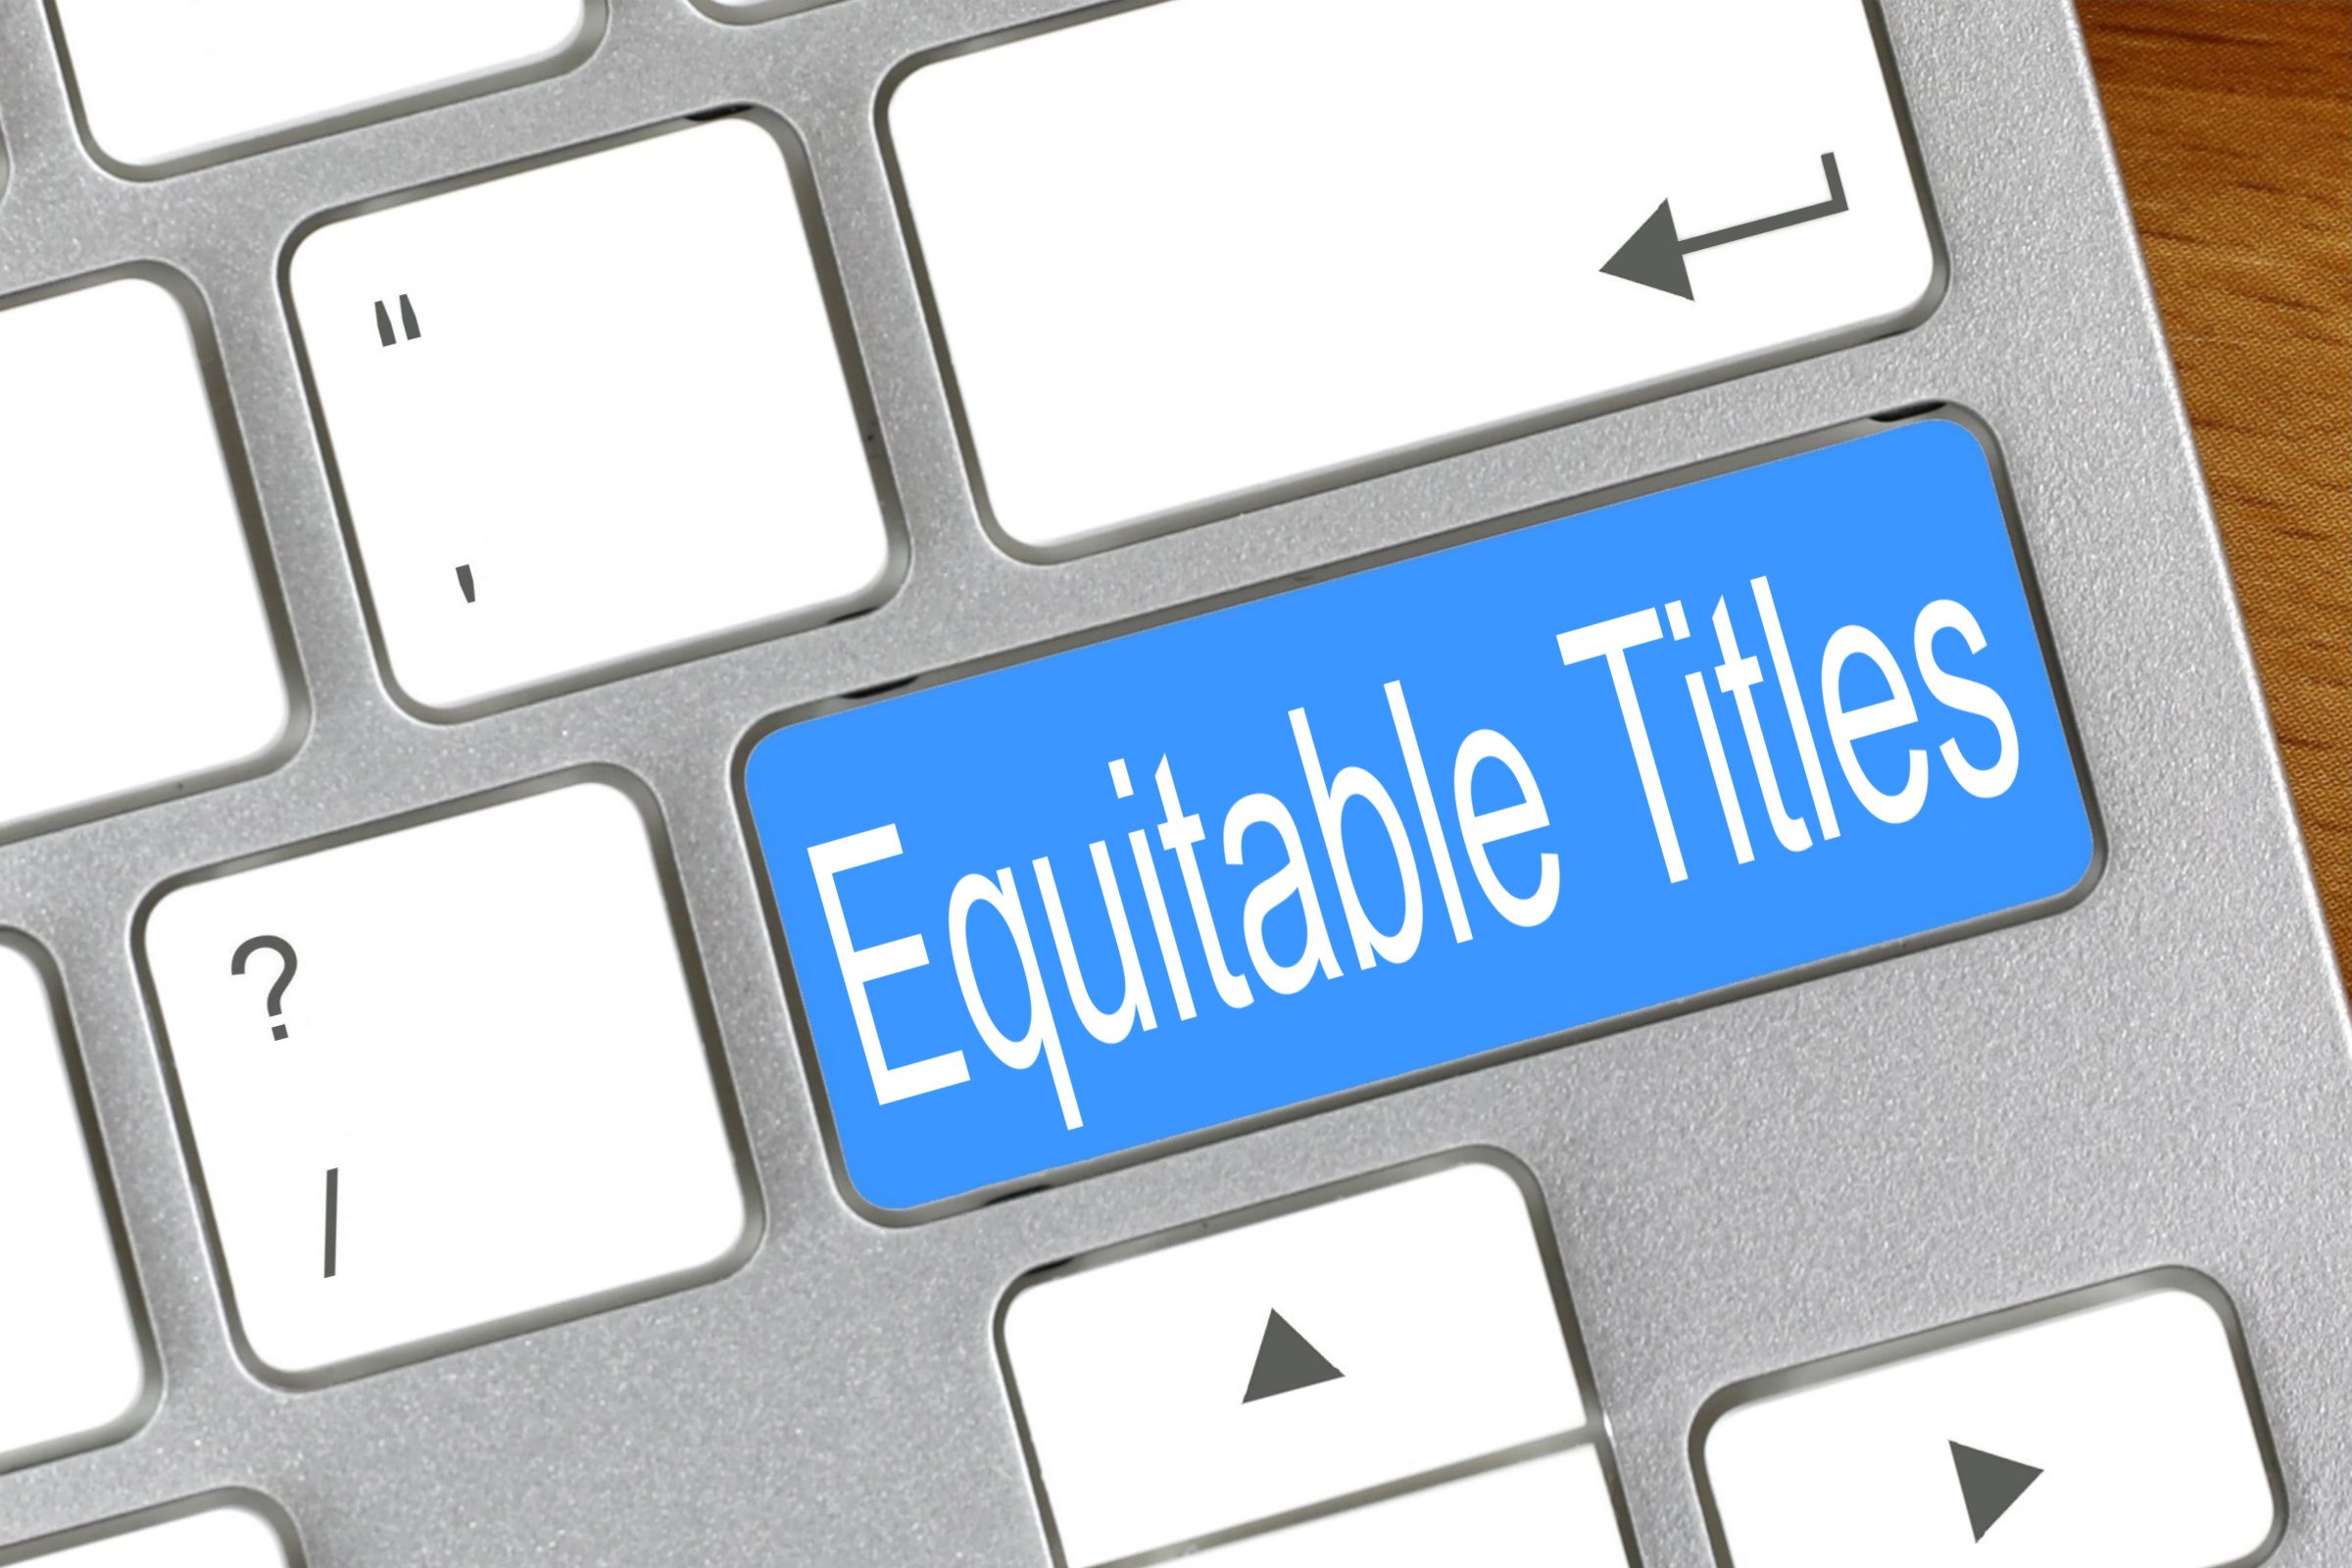 equitable titles